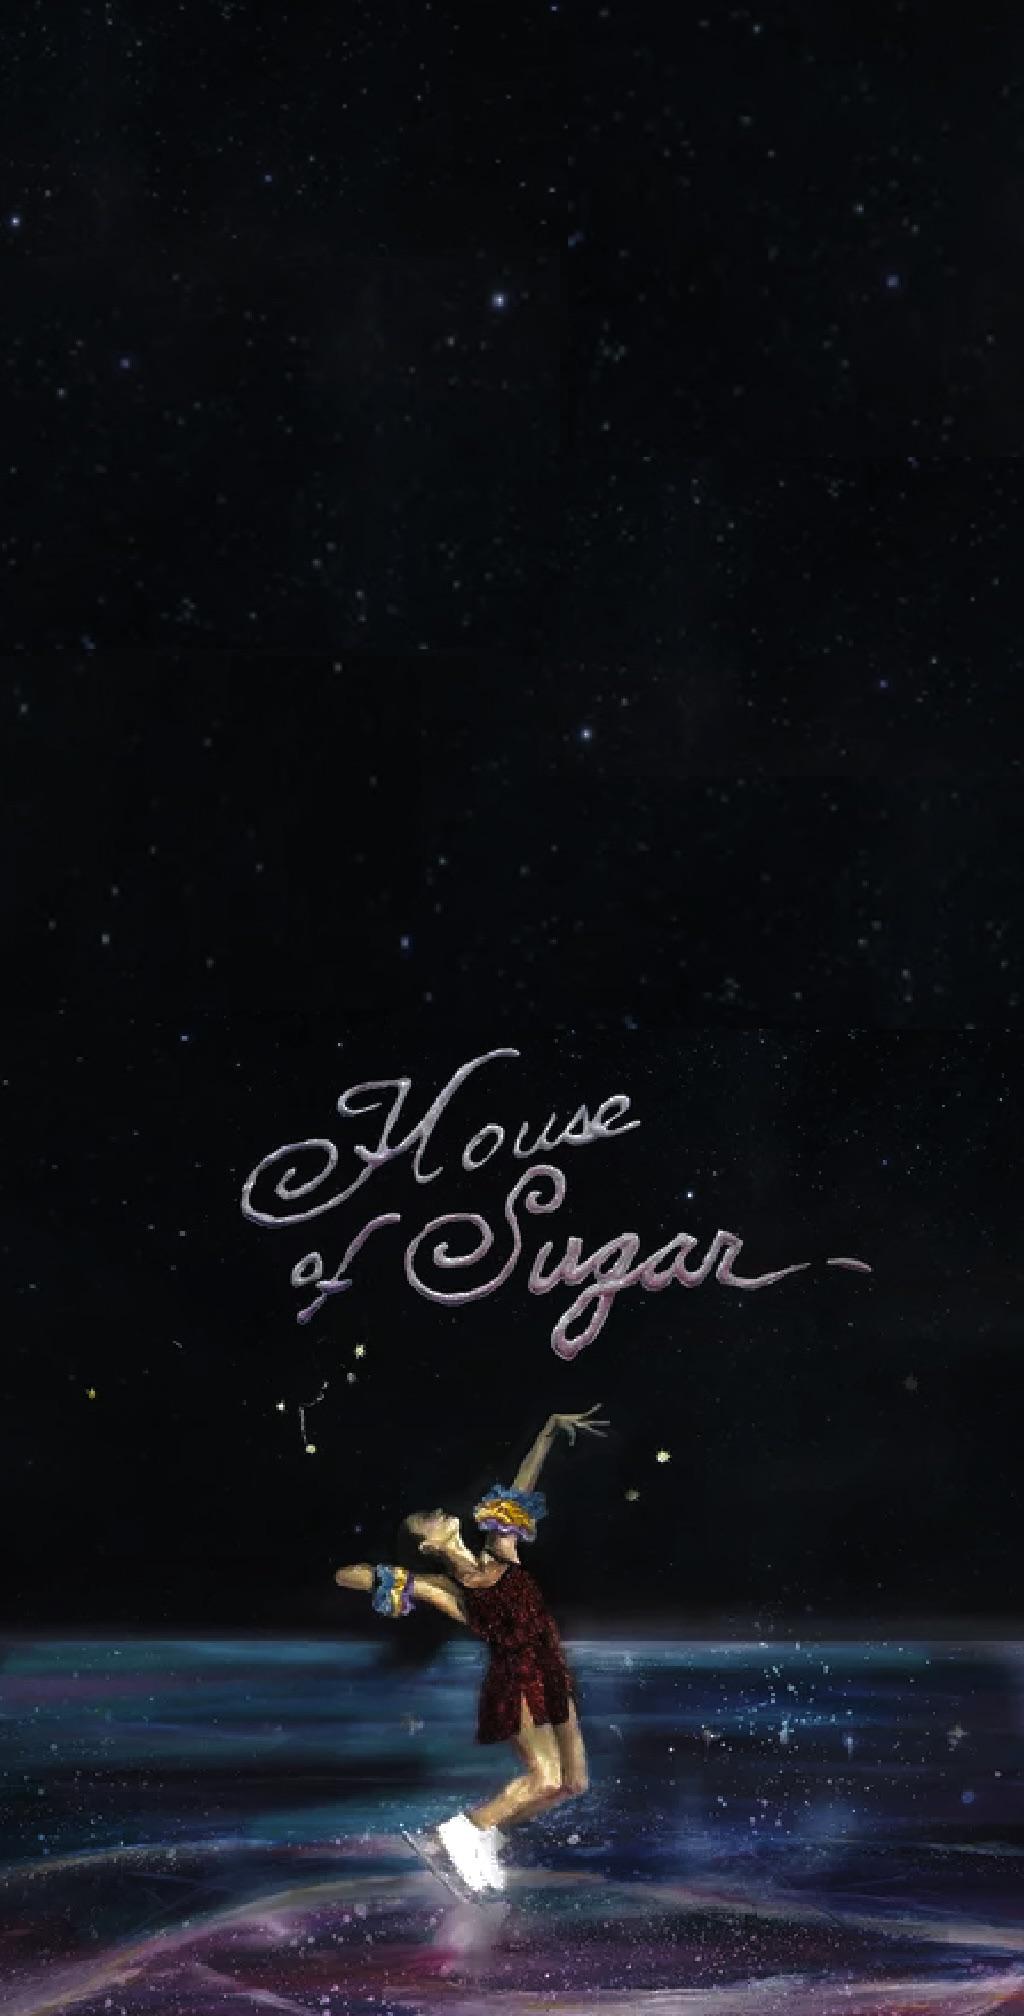 I made a House of Sugar Wallpaper! Feel free to use it :)